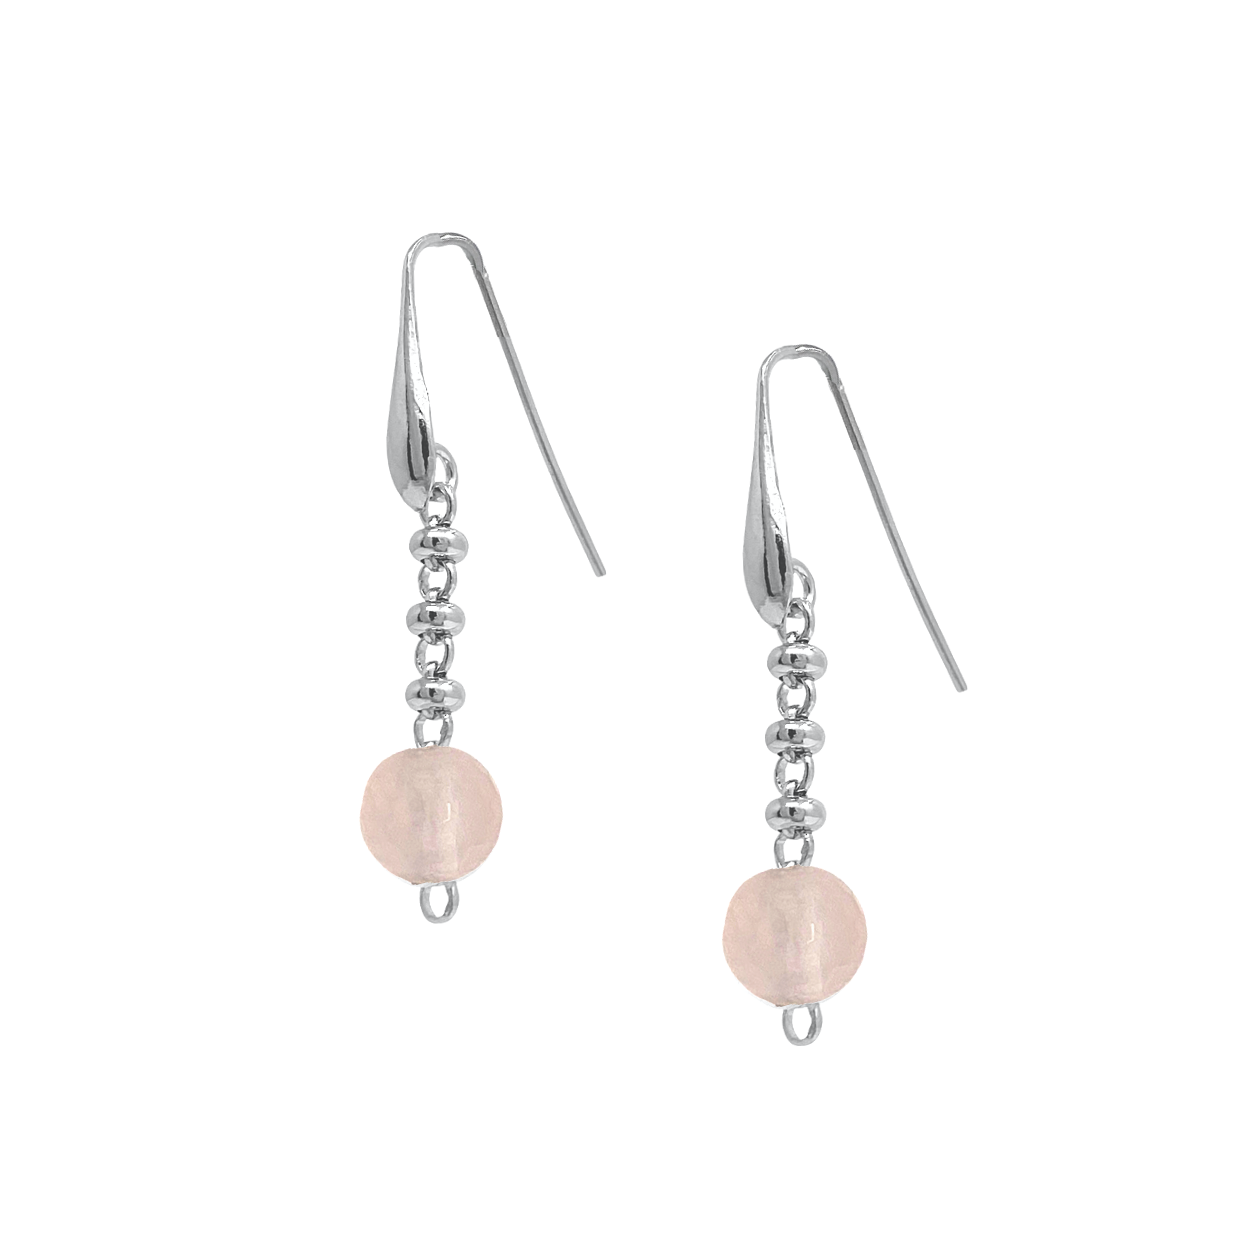 Bubbles Color Earrings in Silver with Rose Quartz